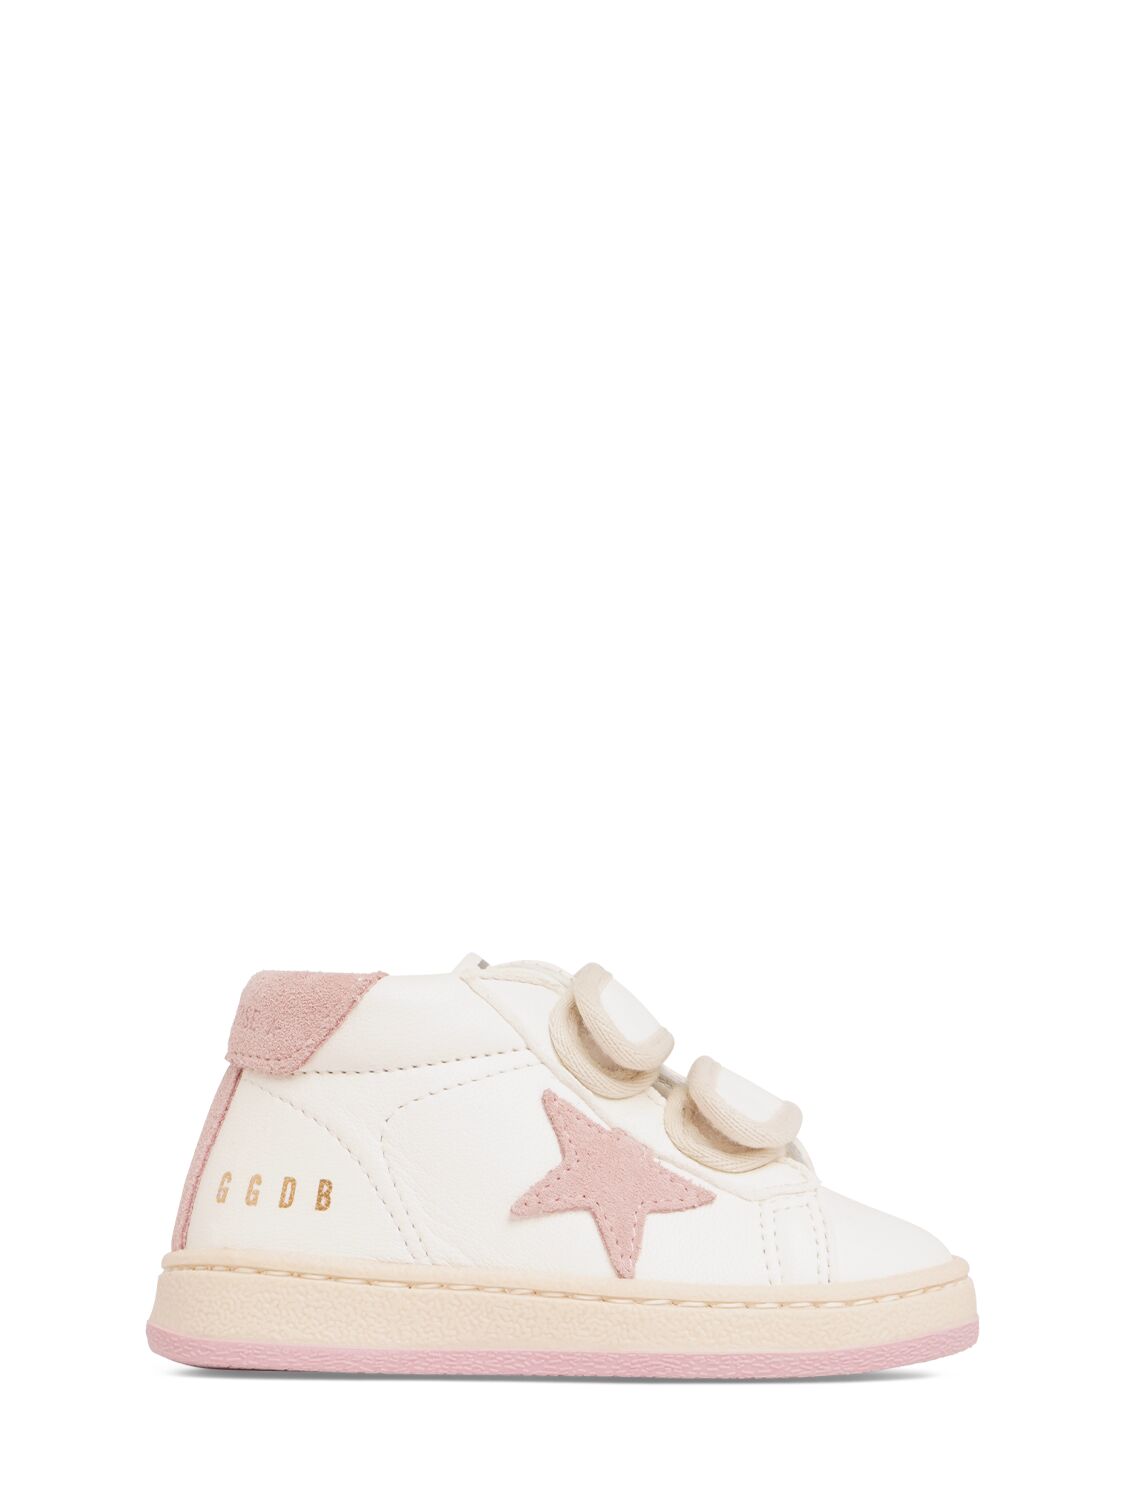 GOLDEN GOOSE JUNE STRAP LEATHER STAR SNEAKERS